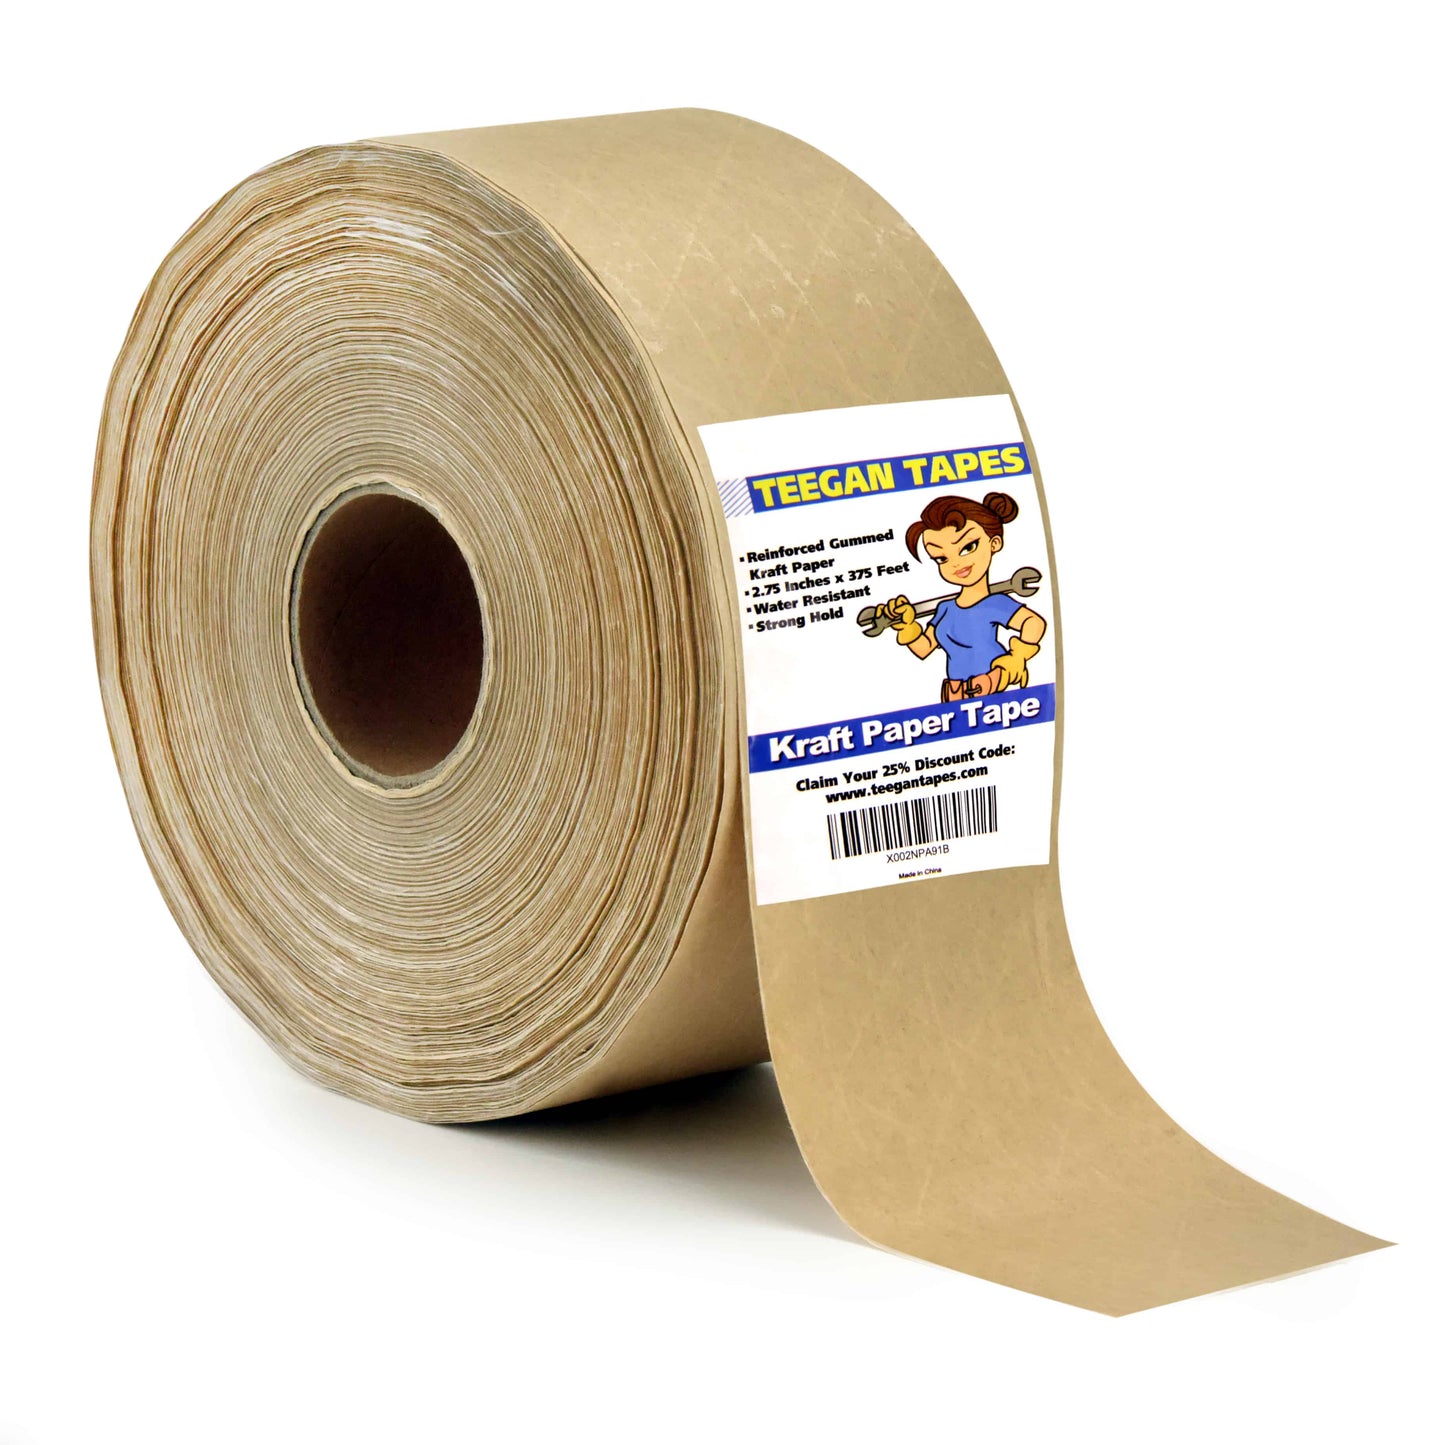 2 INCH x 33' FEET DOUBLE SIDED ADHESIVE CLEAR TAPE ROLL Heavy Duty Strong